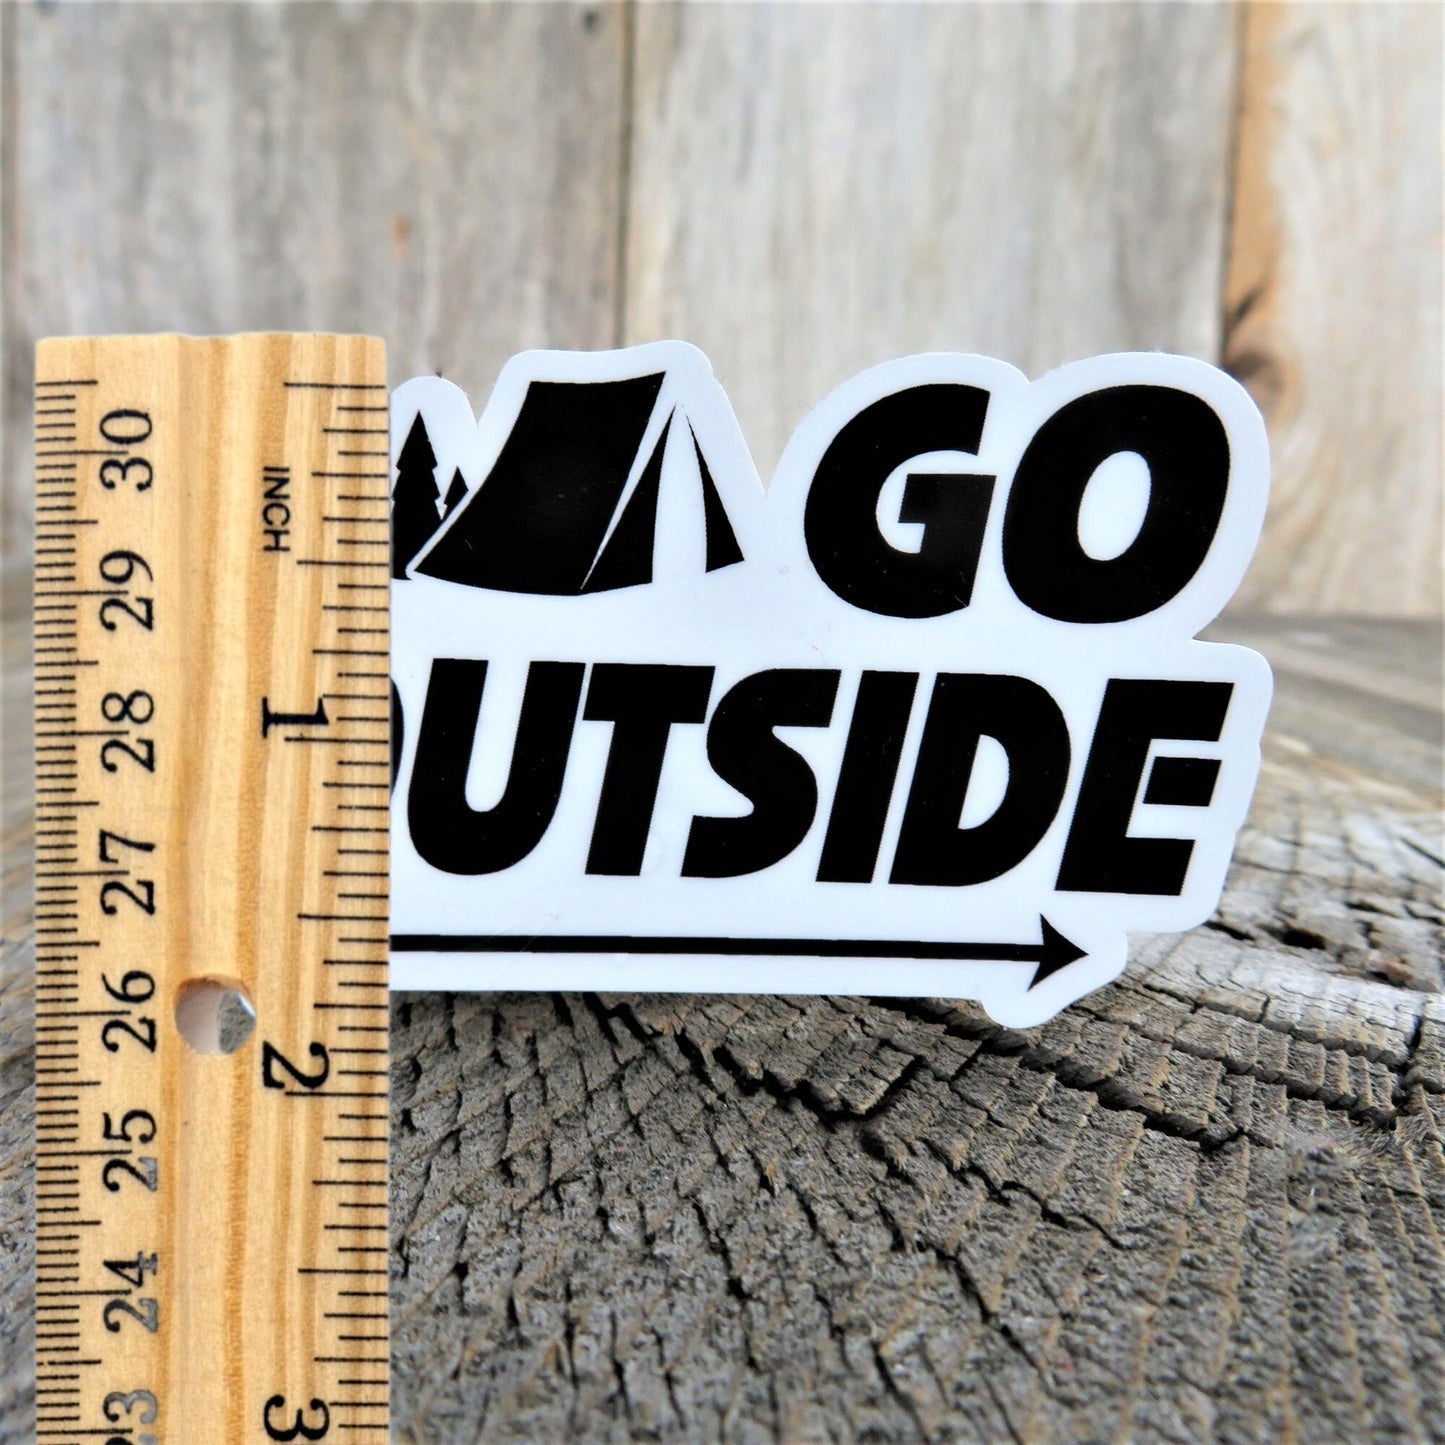 Go Outside! Sticker Back To Nature Black White Print Full Color Waterproof Car Water Bottle Laptop